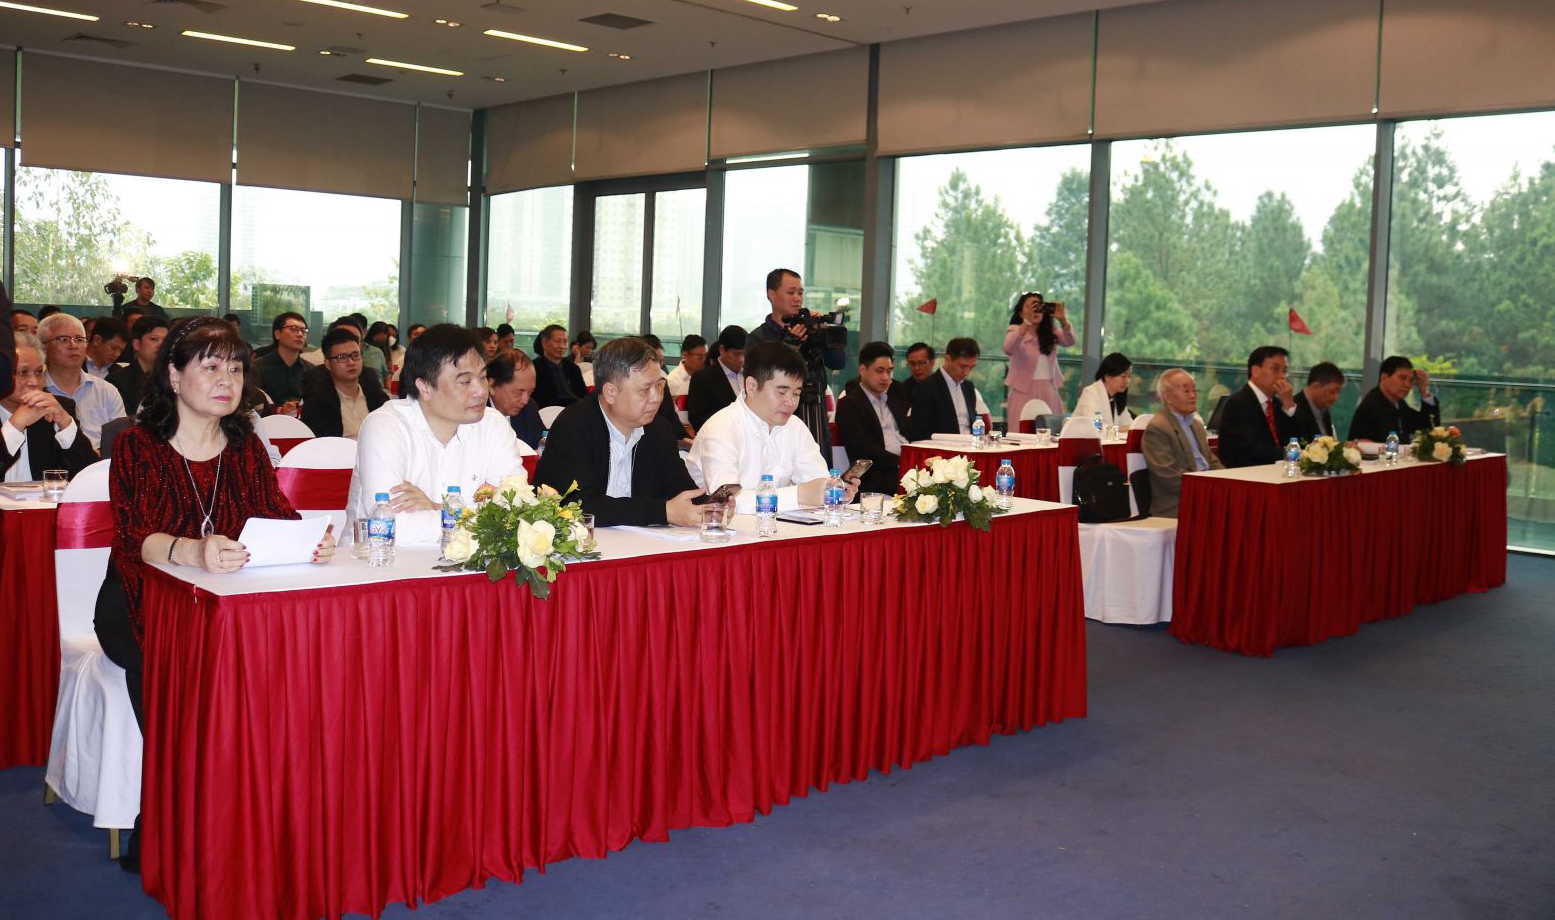 Participants of the VABM conference